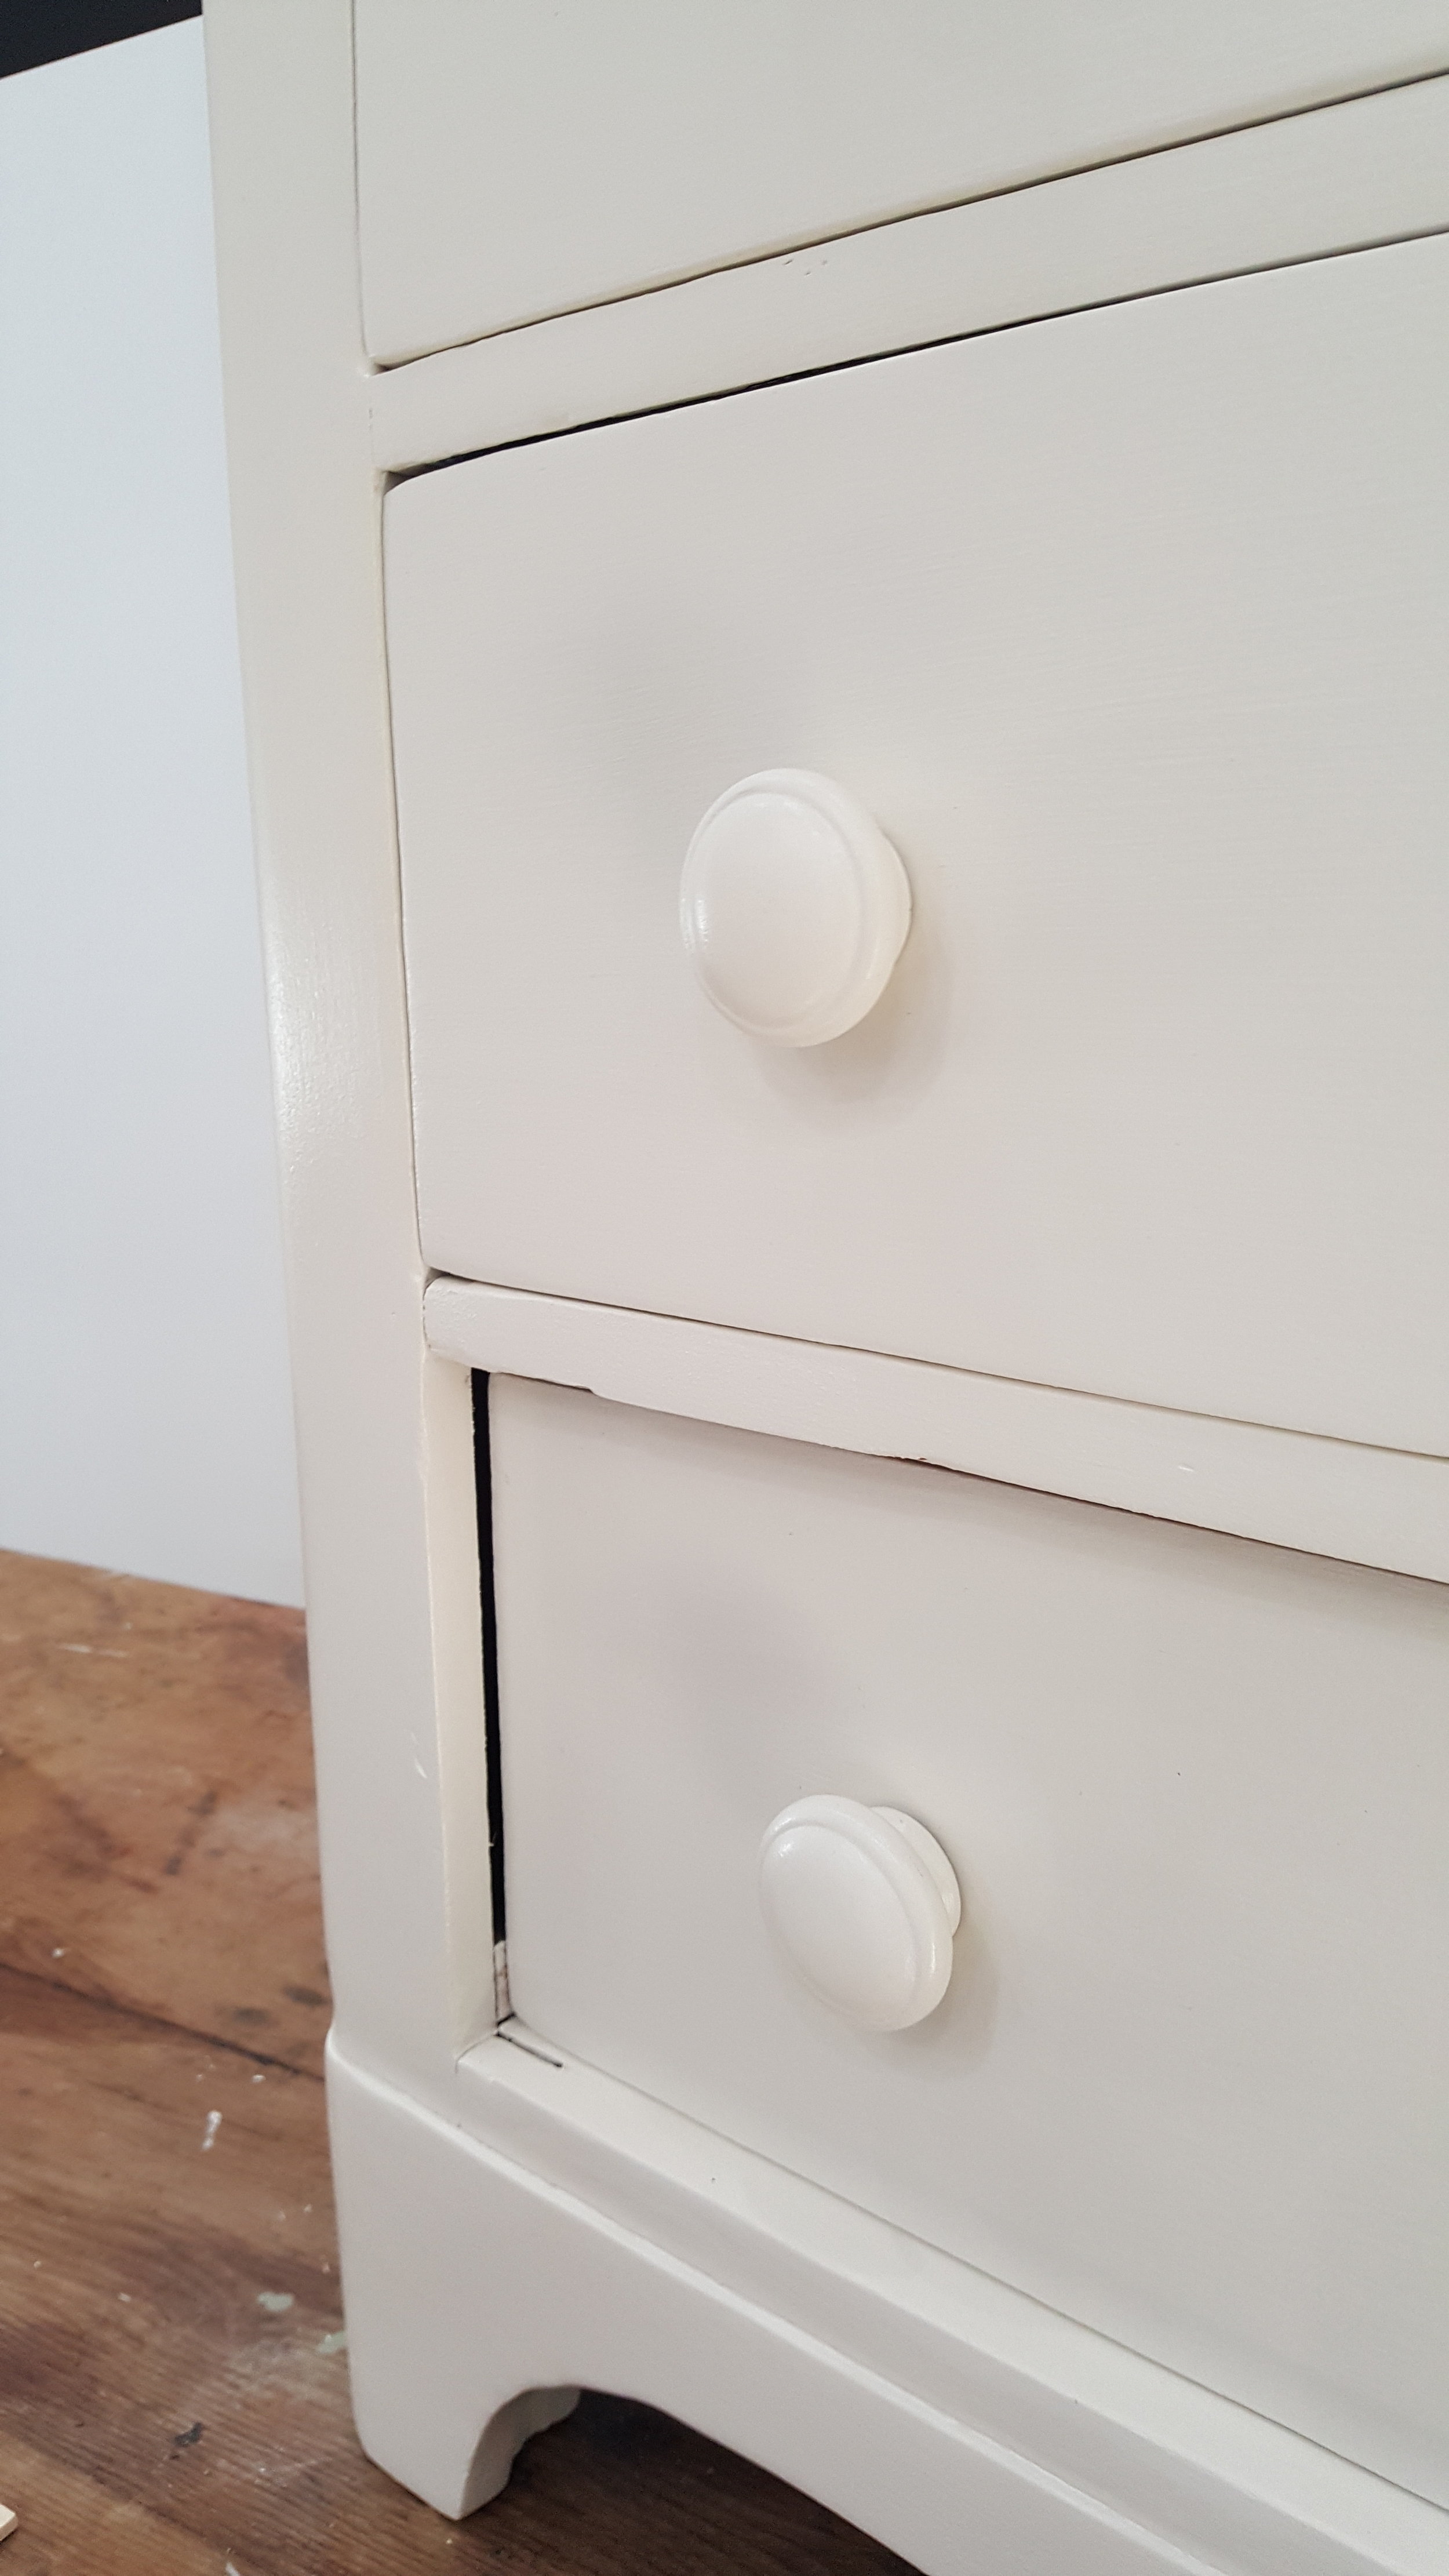 How To Easily Fix Broken Drawer Stops, How To Fix Drawers On Old Dresser